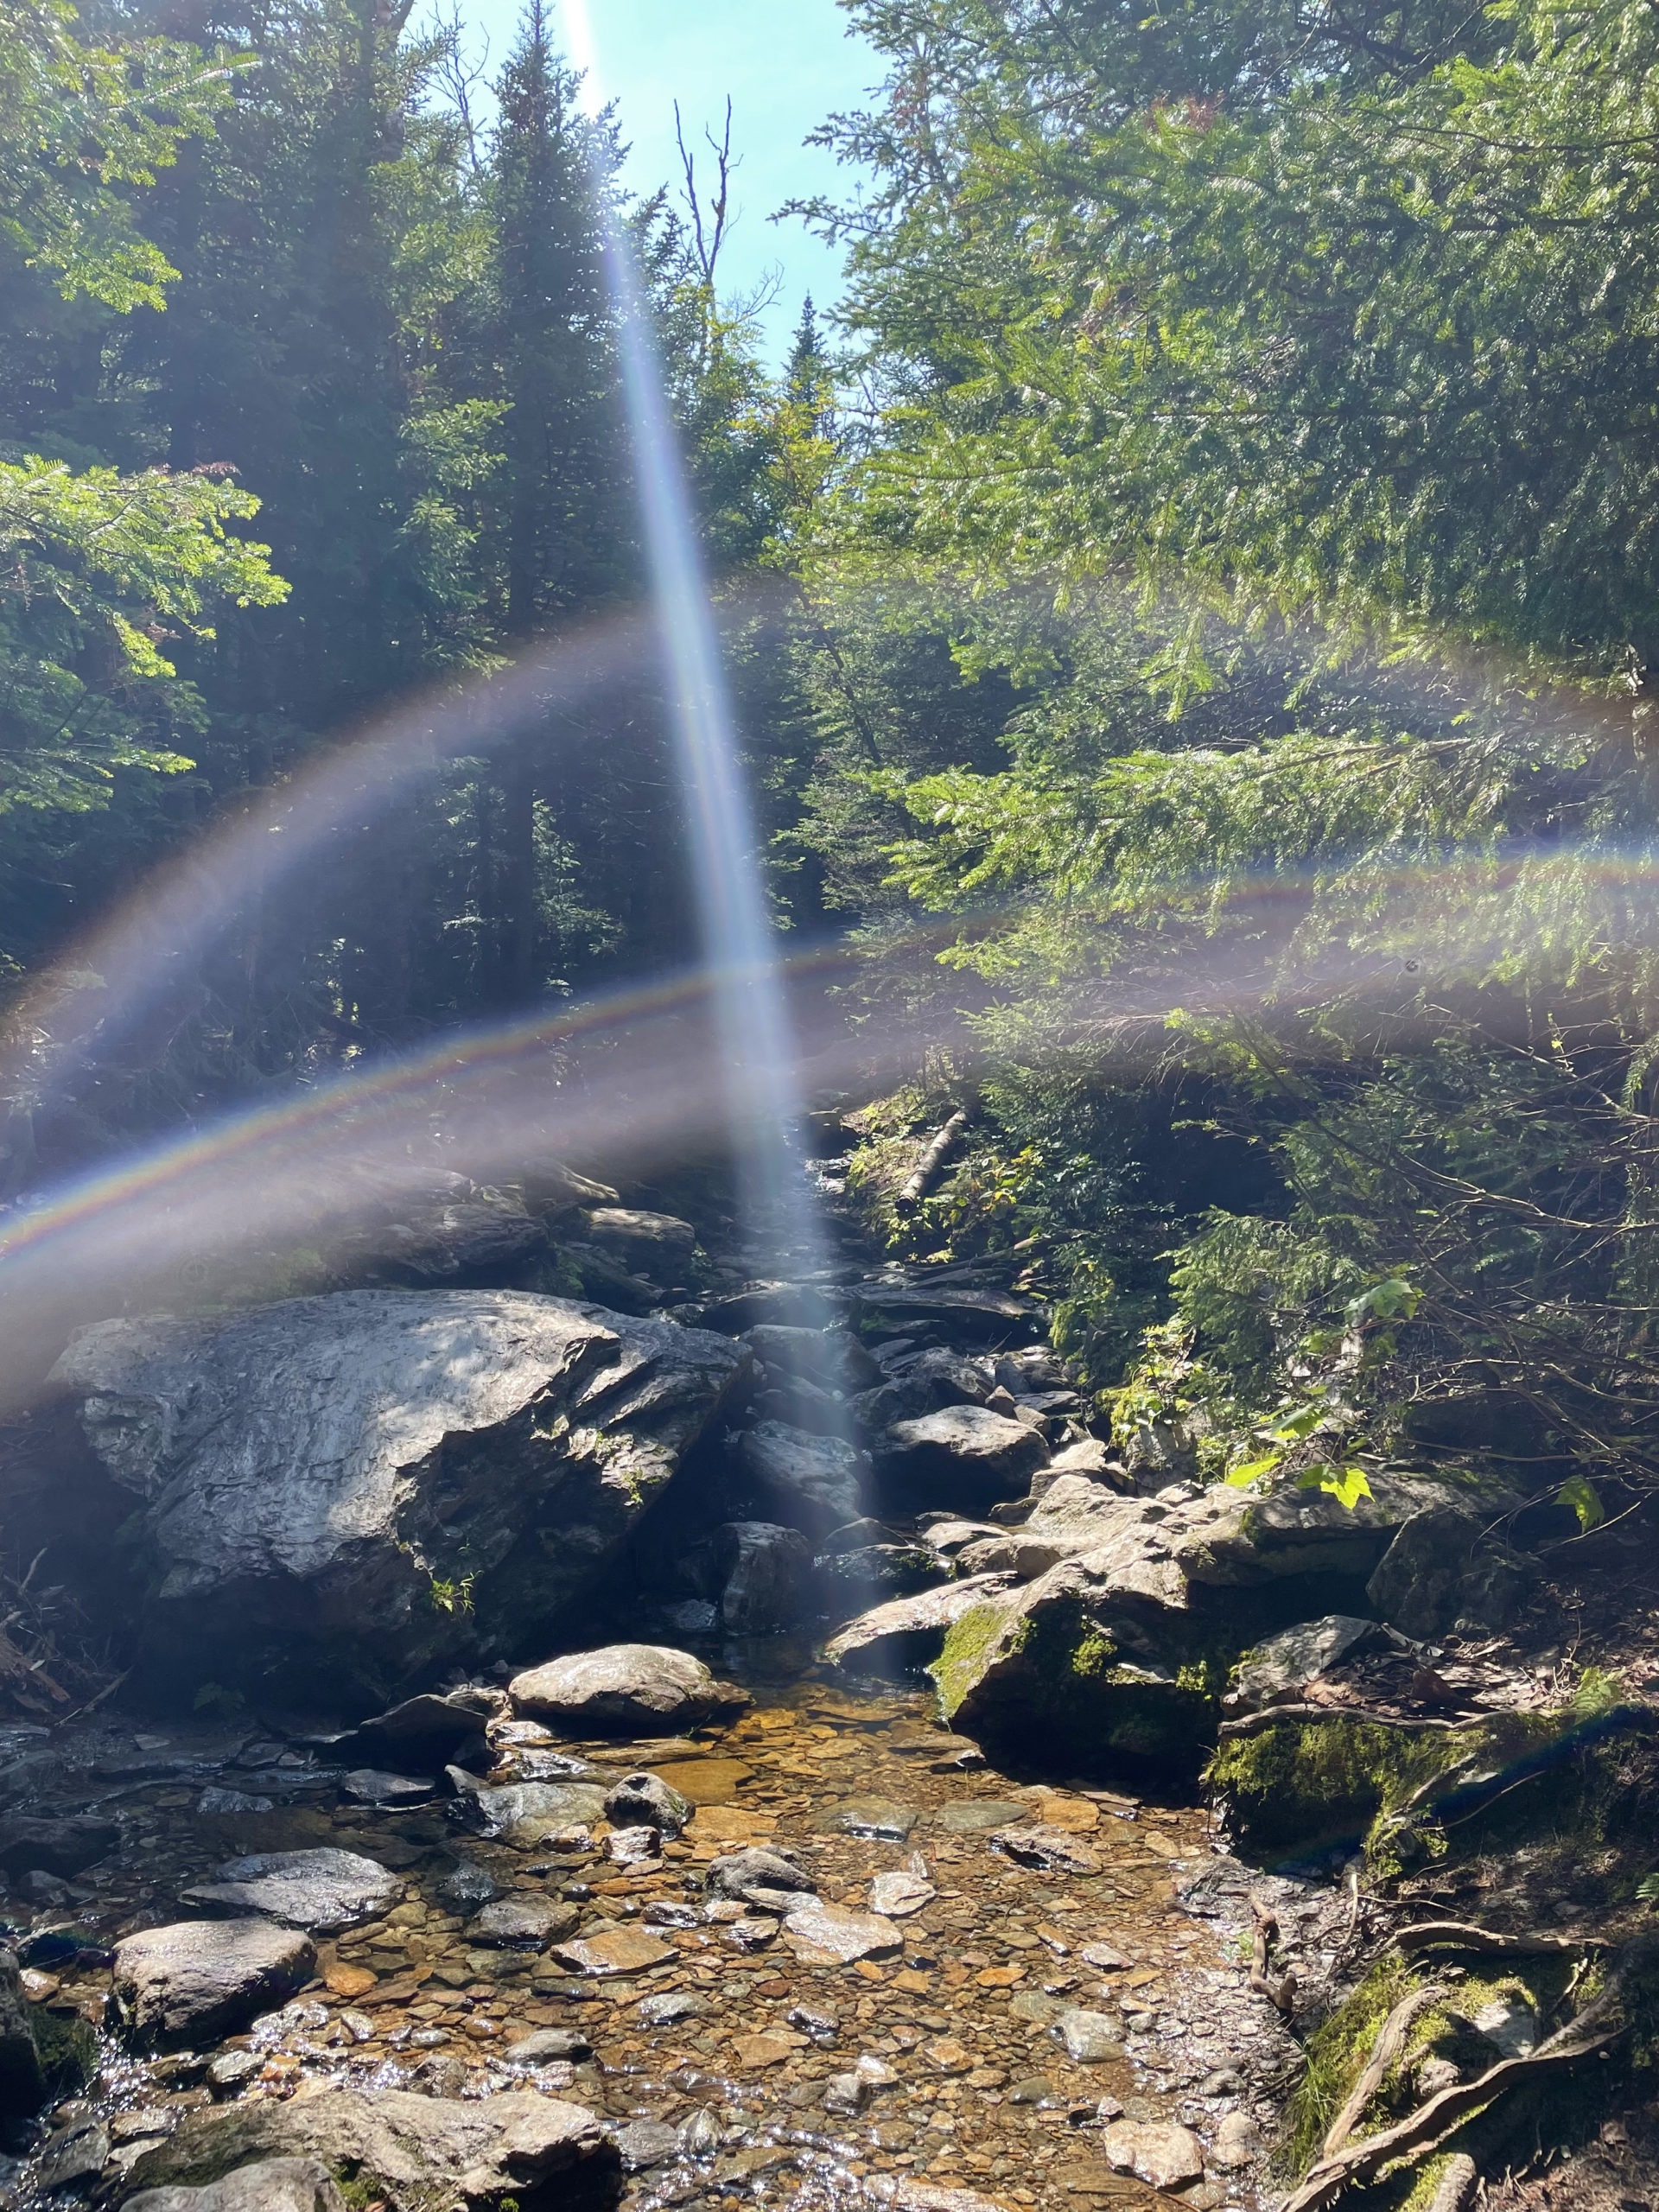 Rainbow over a cascade, seen while hiking Camel's Hump in the Green Mountains, Vermont